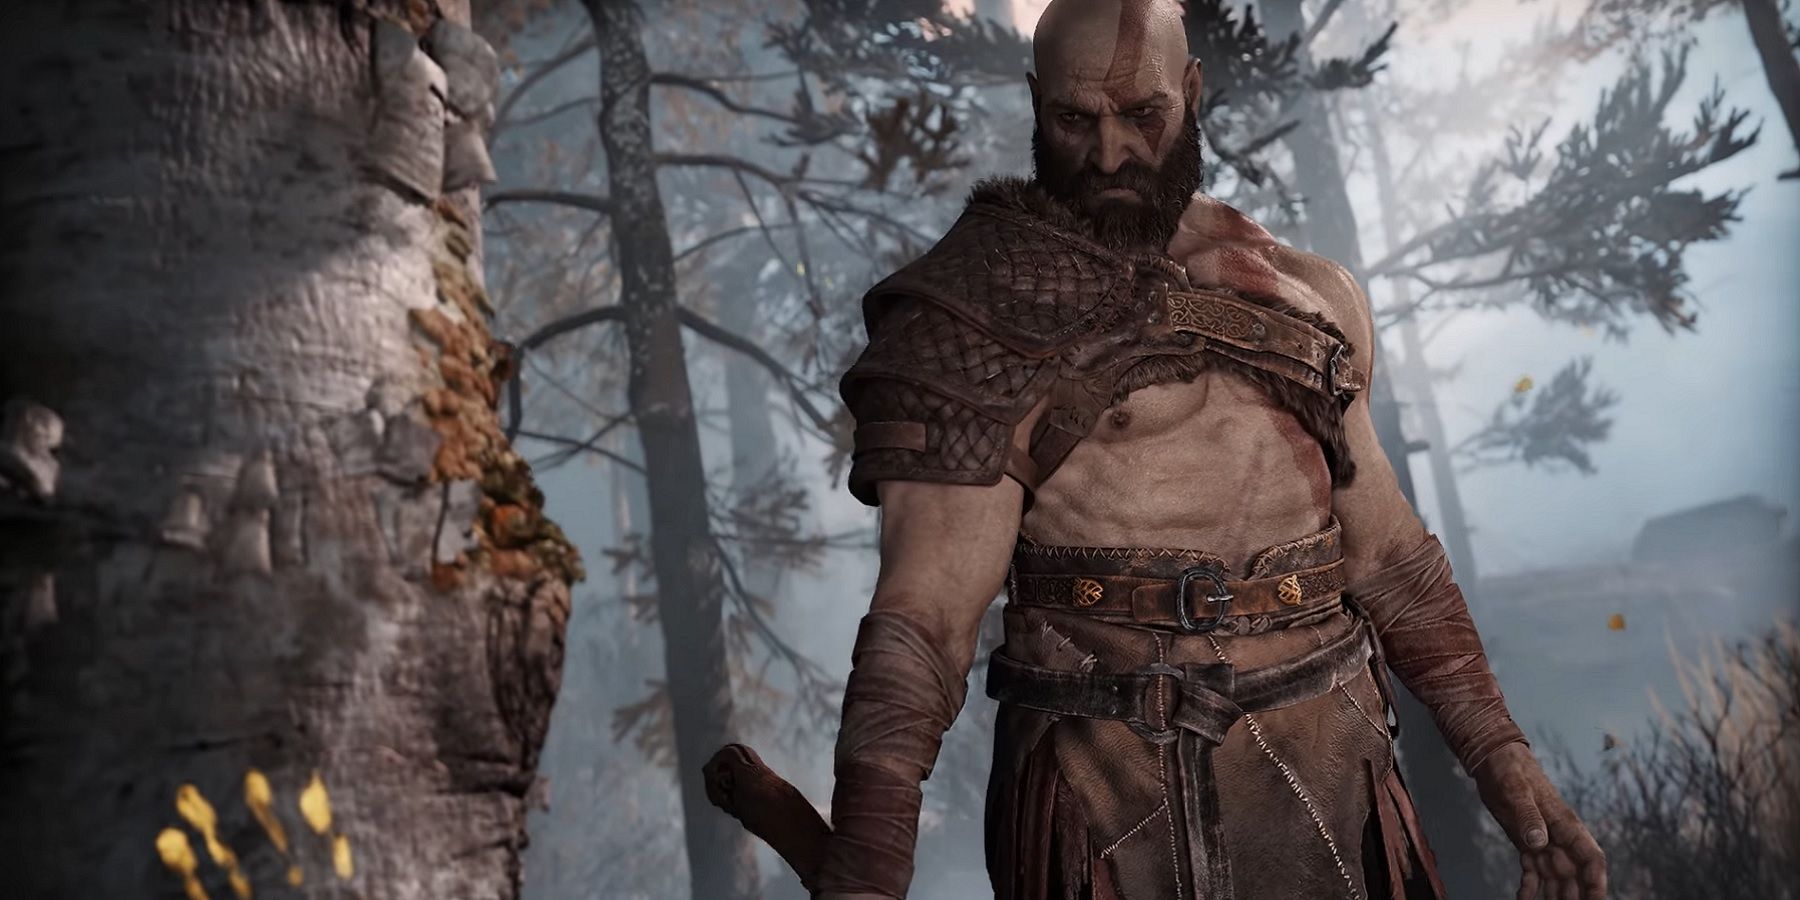 Image from God of War on PC showing Kratos about to chop a tree down.